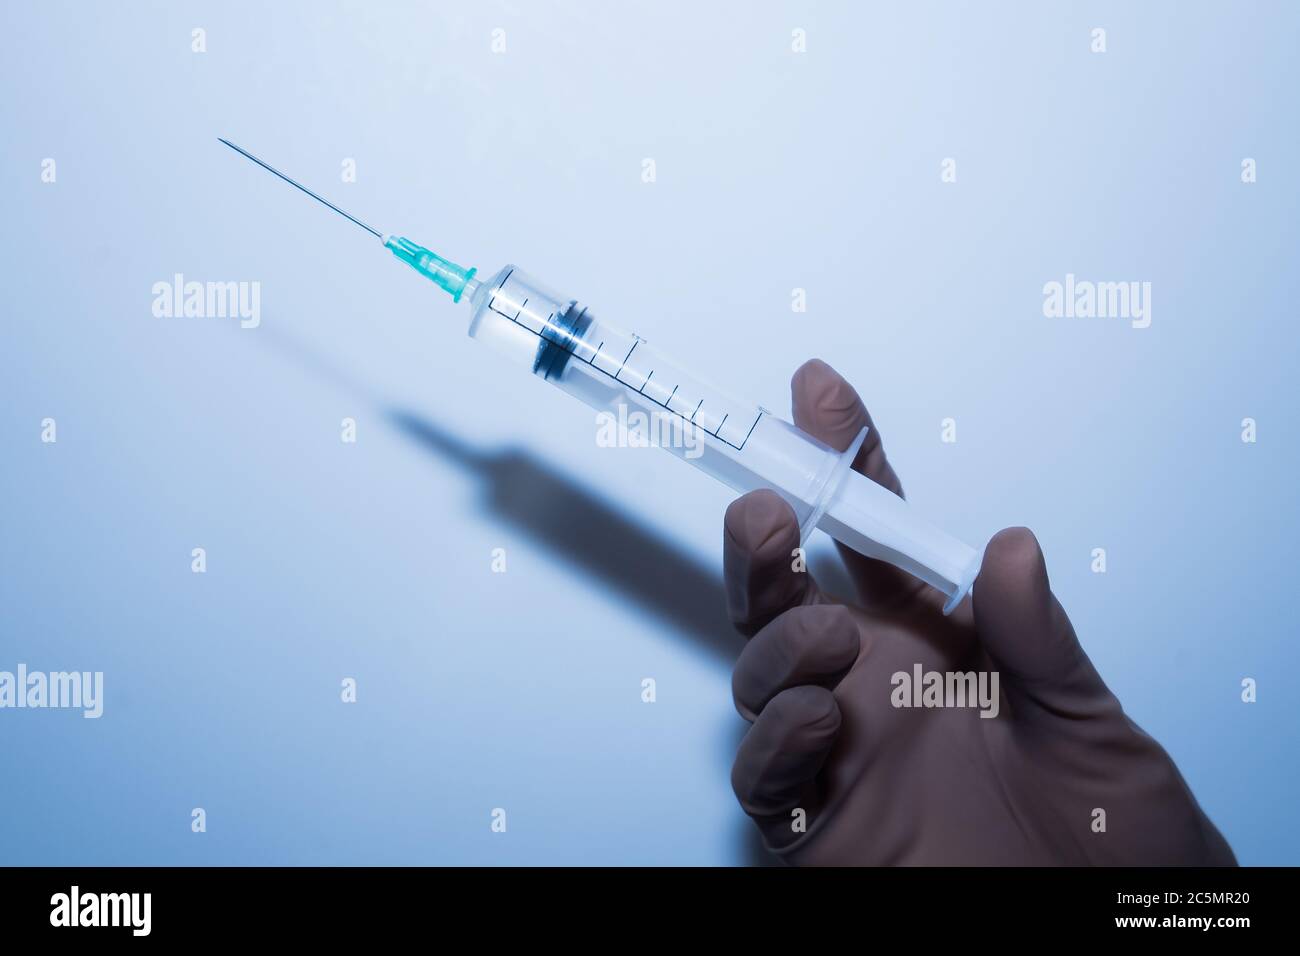 Syringe in the doctor hand in a medical rubber glove. The doctor is vaccinated.  Stock Photo